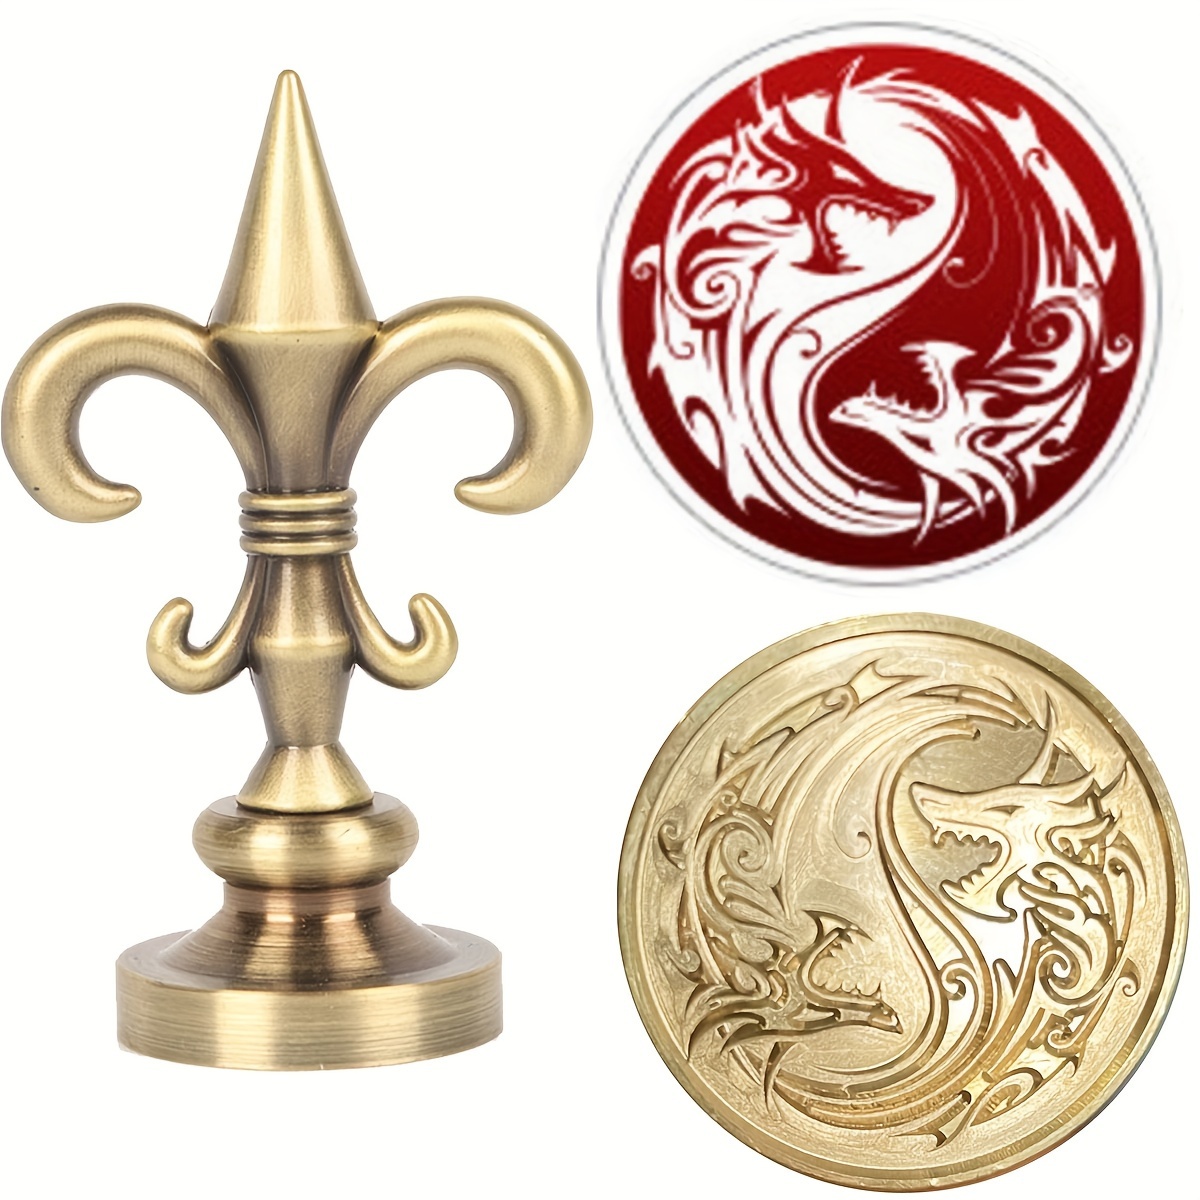 

Dragon-themed Pure Copper Wax Seal Stamp Set With Metal Handle - Intricate Double Dragon Design For Letter Sealing And Crafts